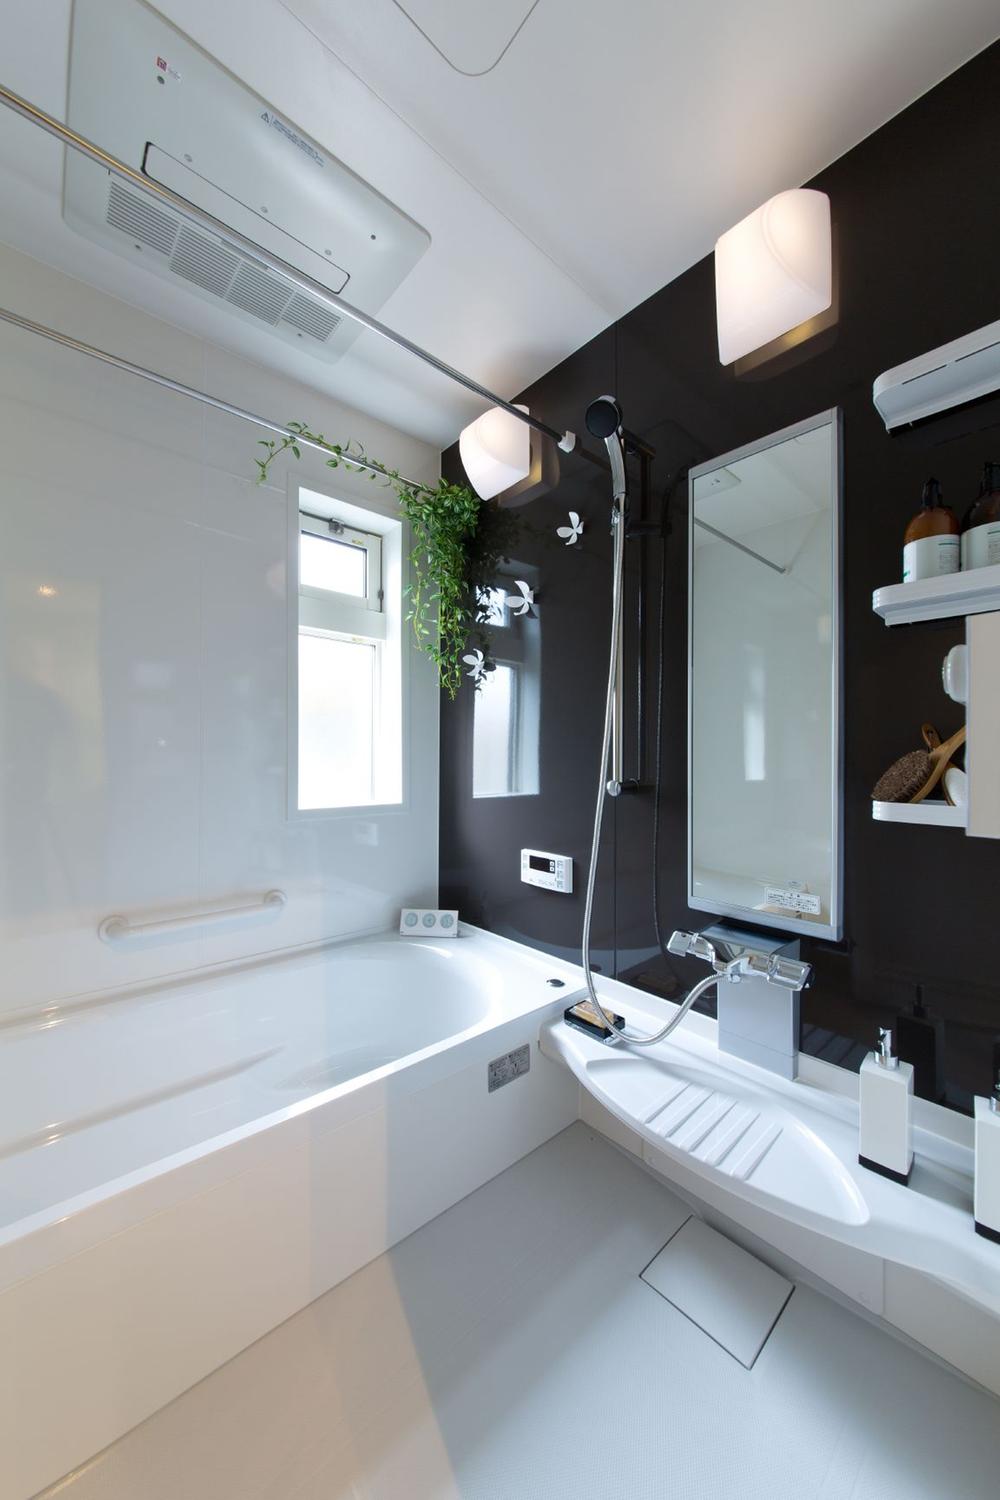 Bathroom. Brightly, Unit bus with cleanliness. Ease of cleaning is also a point.